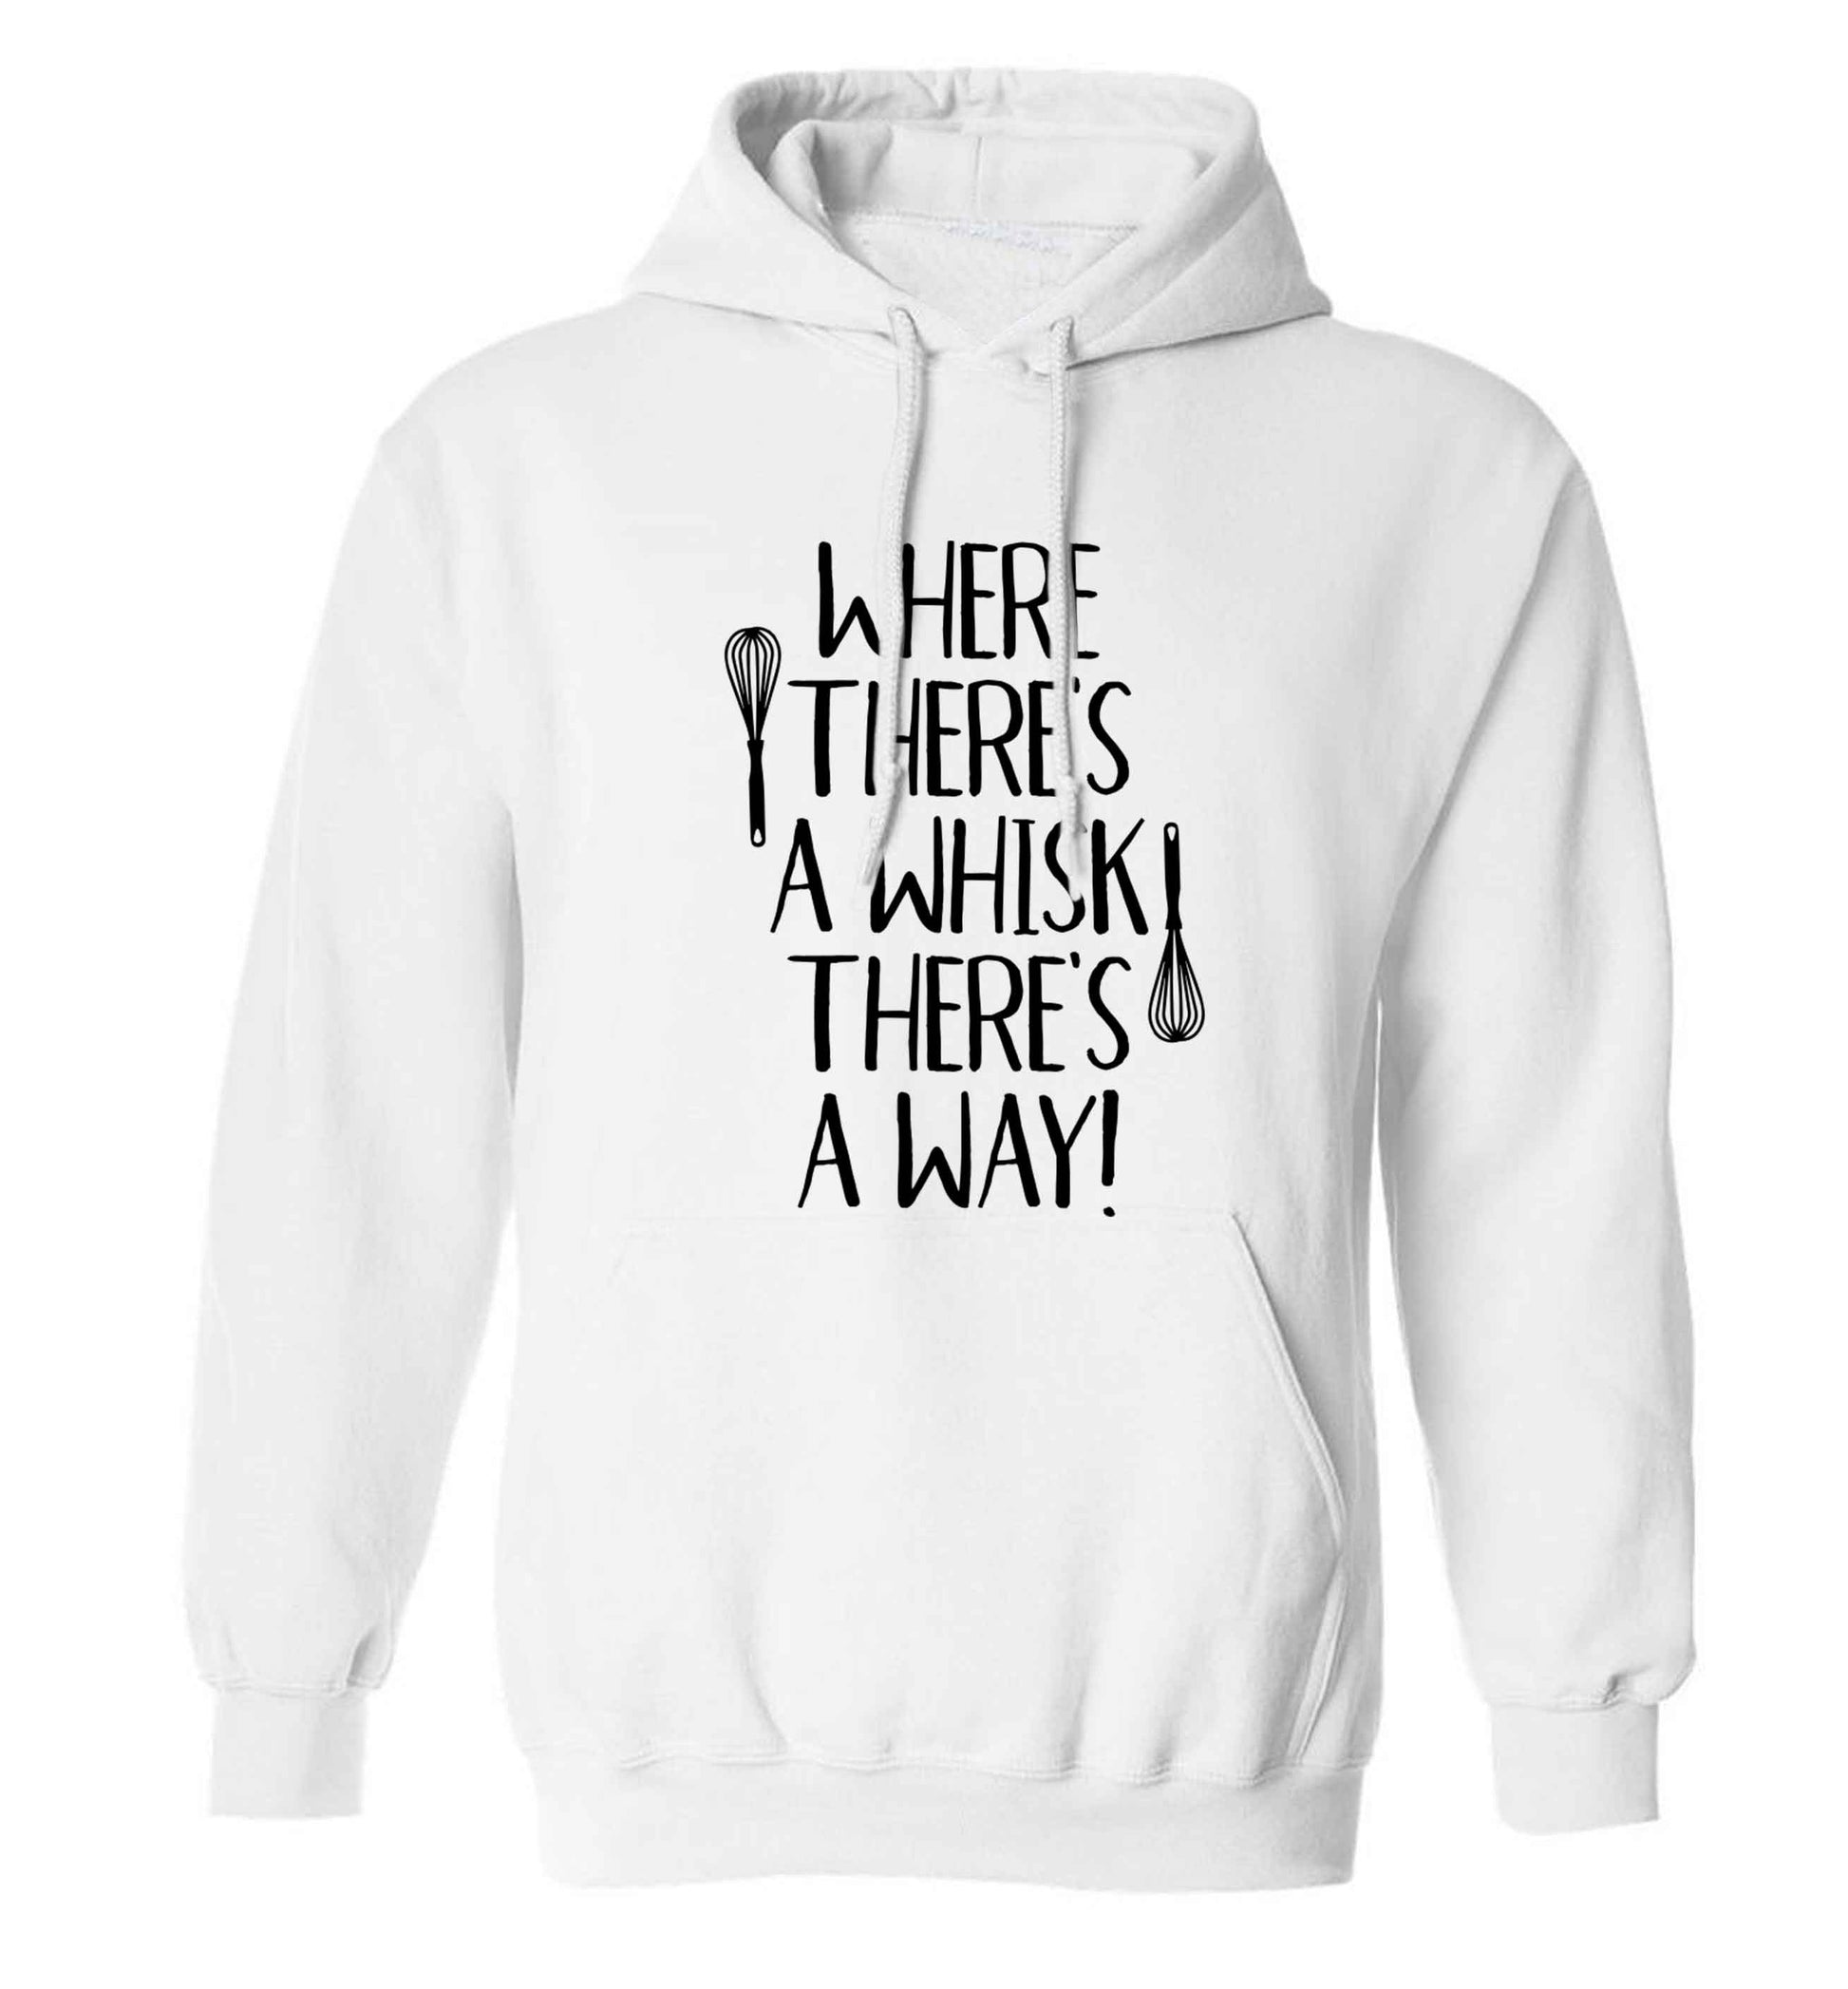 Where there's a whisk there's a way adults unisex white hoodie 2XL